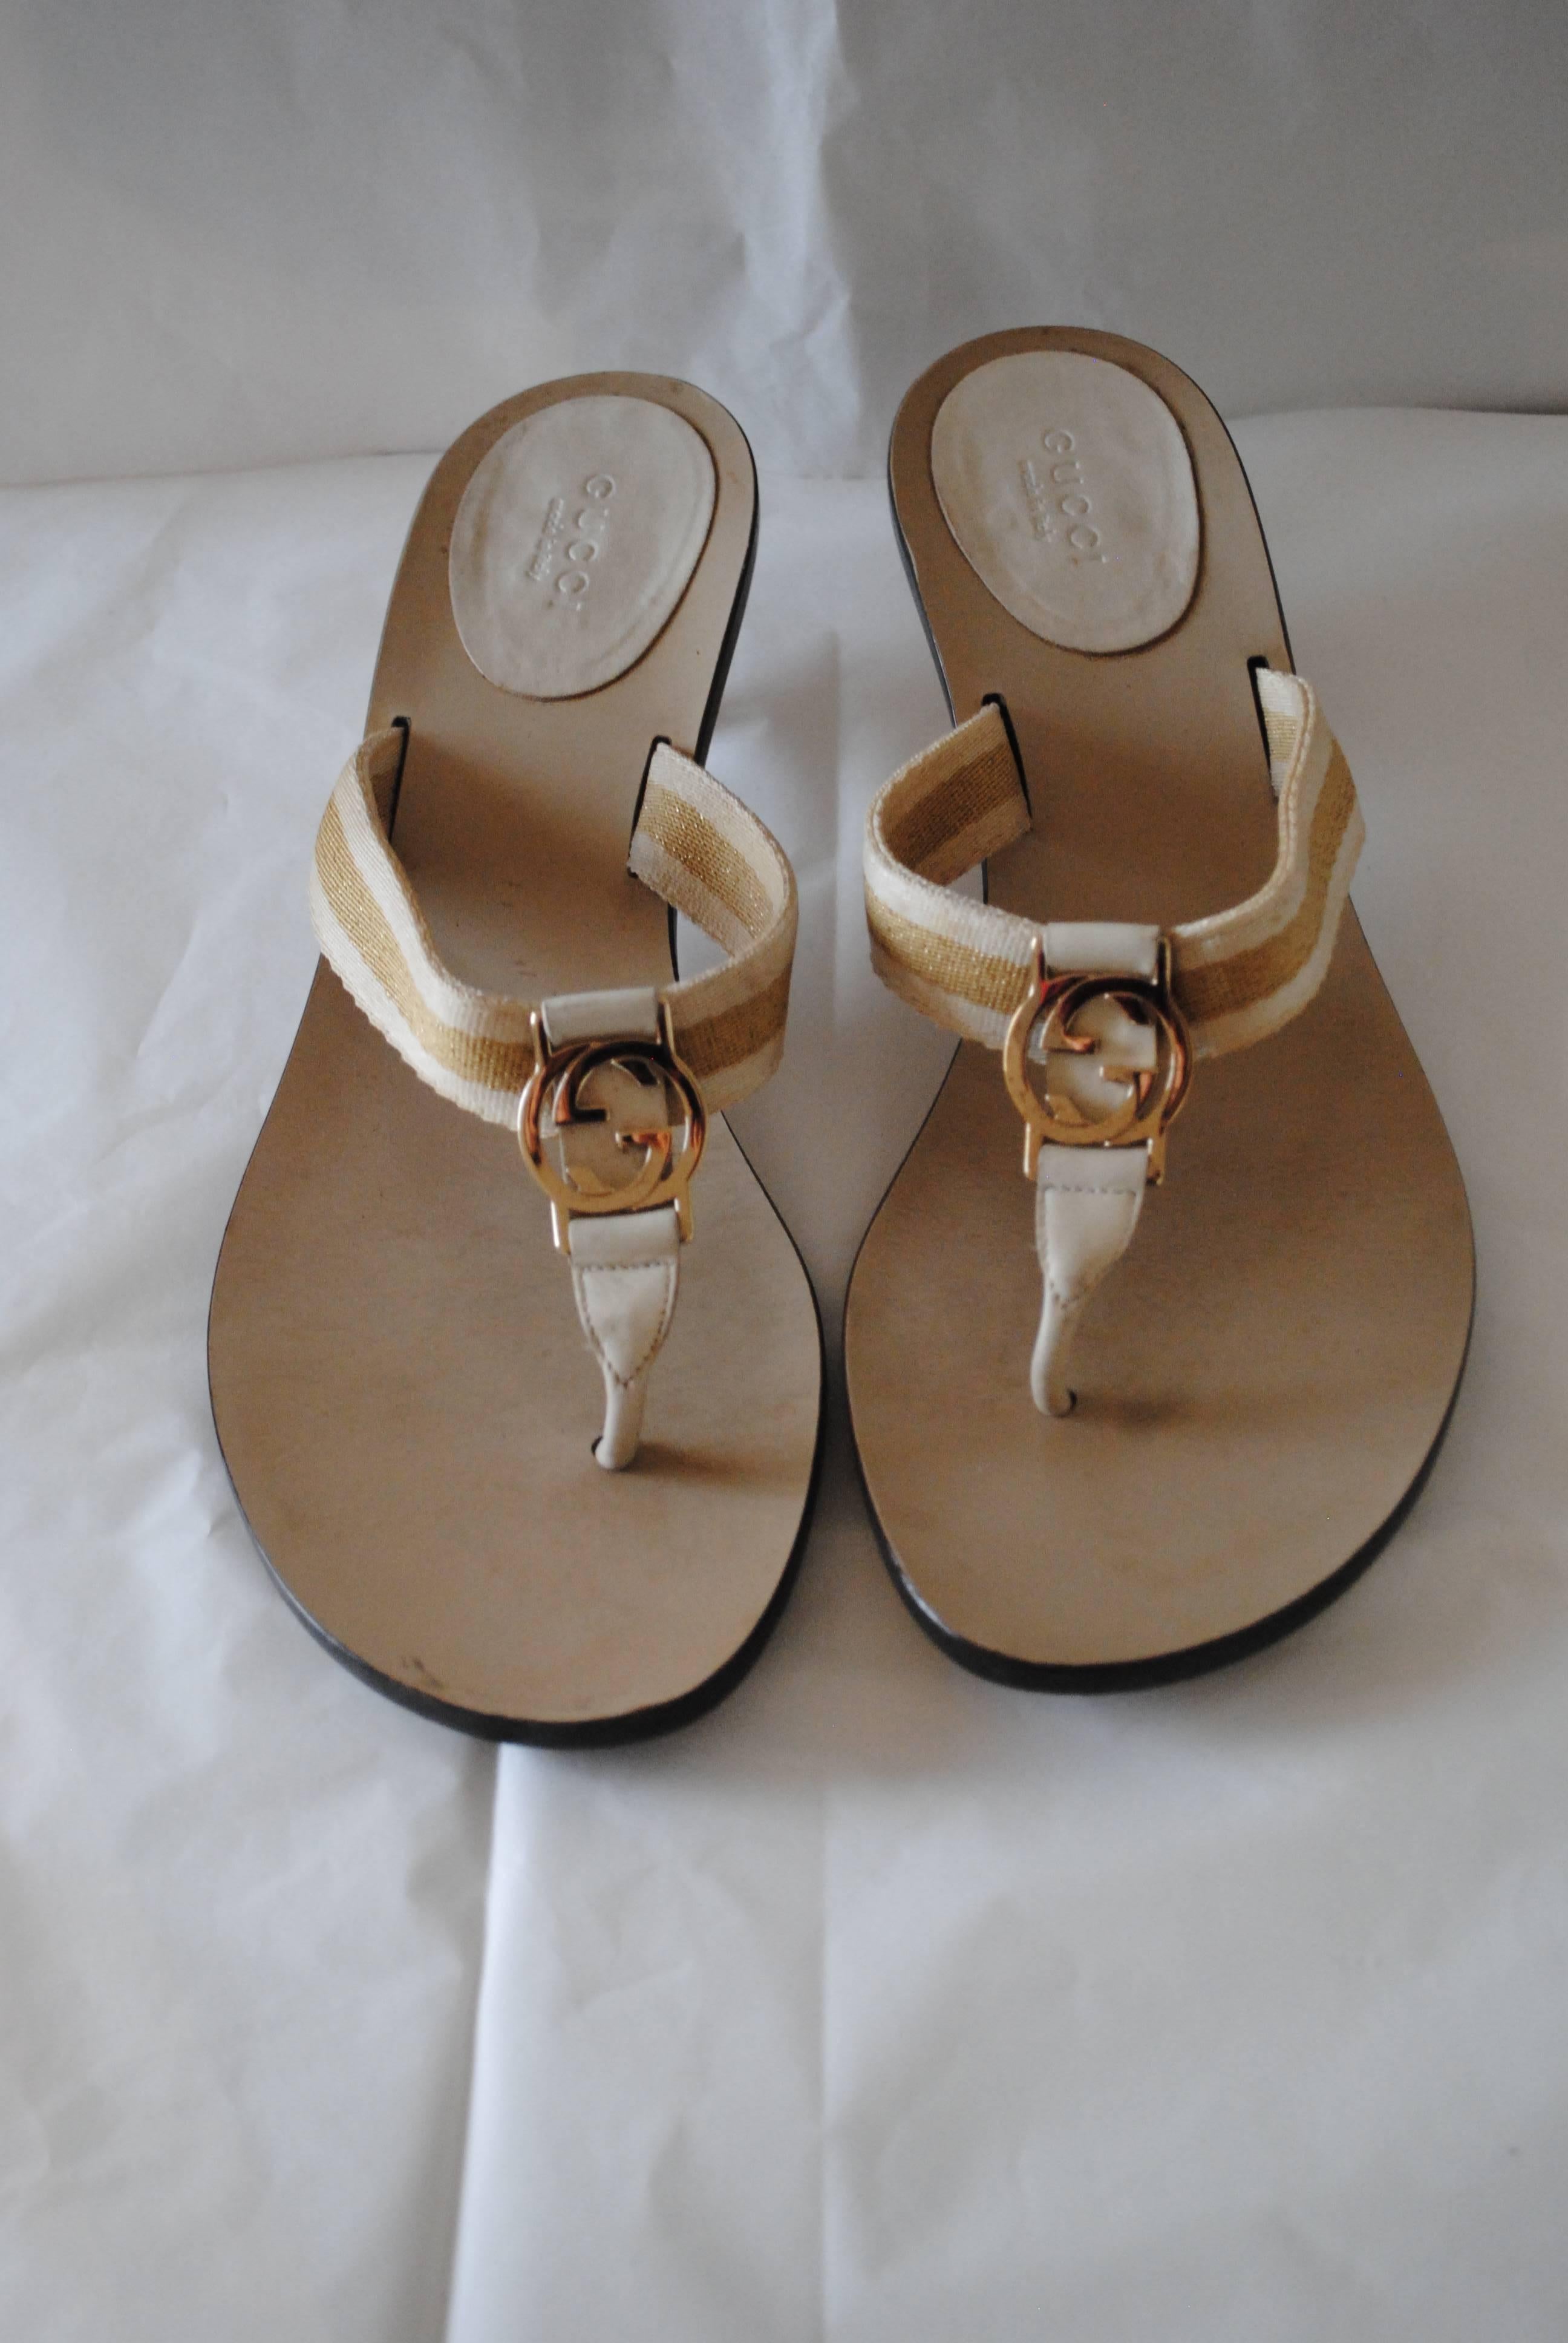 Gucci Cream GG Gold Logo Sandals

Totally made in italy in italian size range 38.5

Bamboo heel